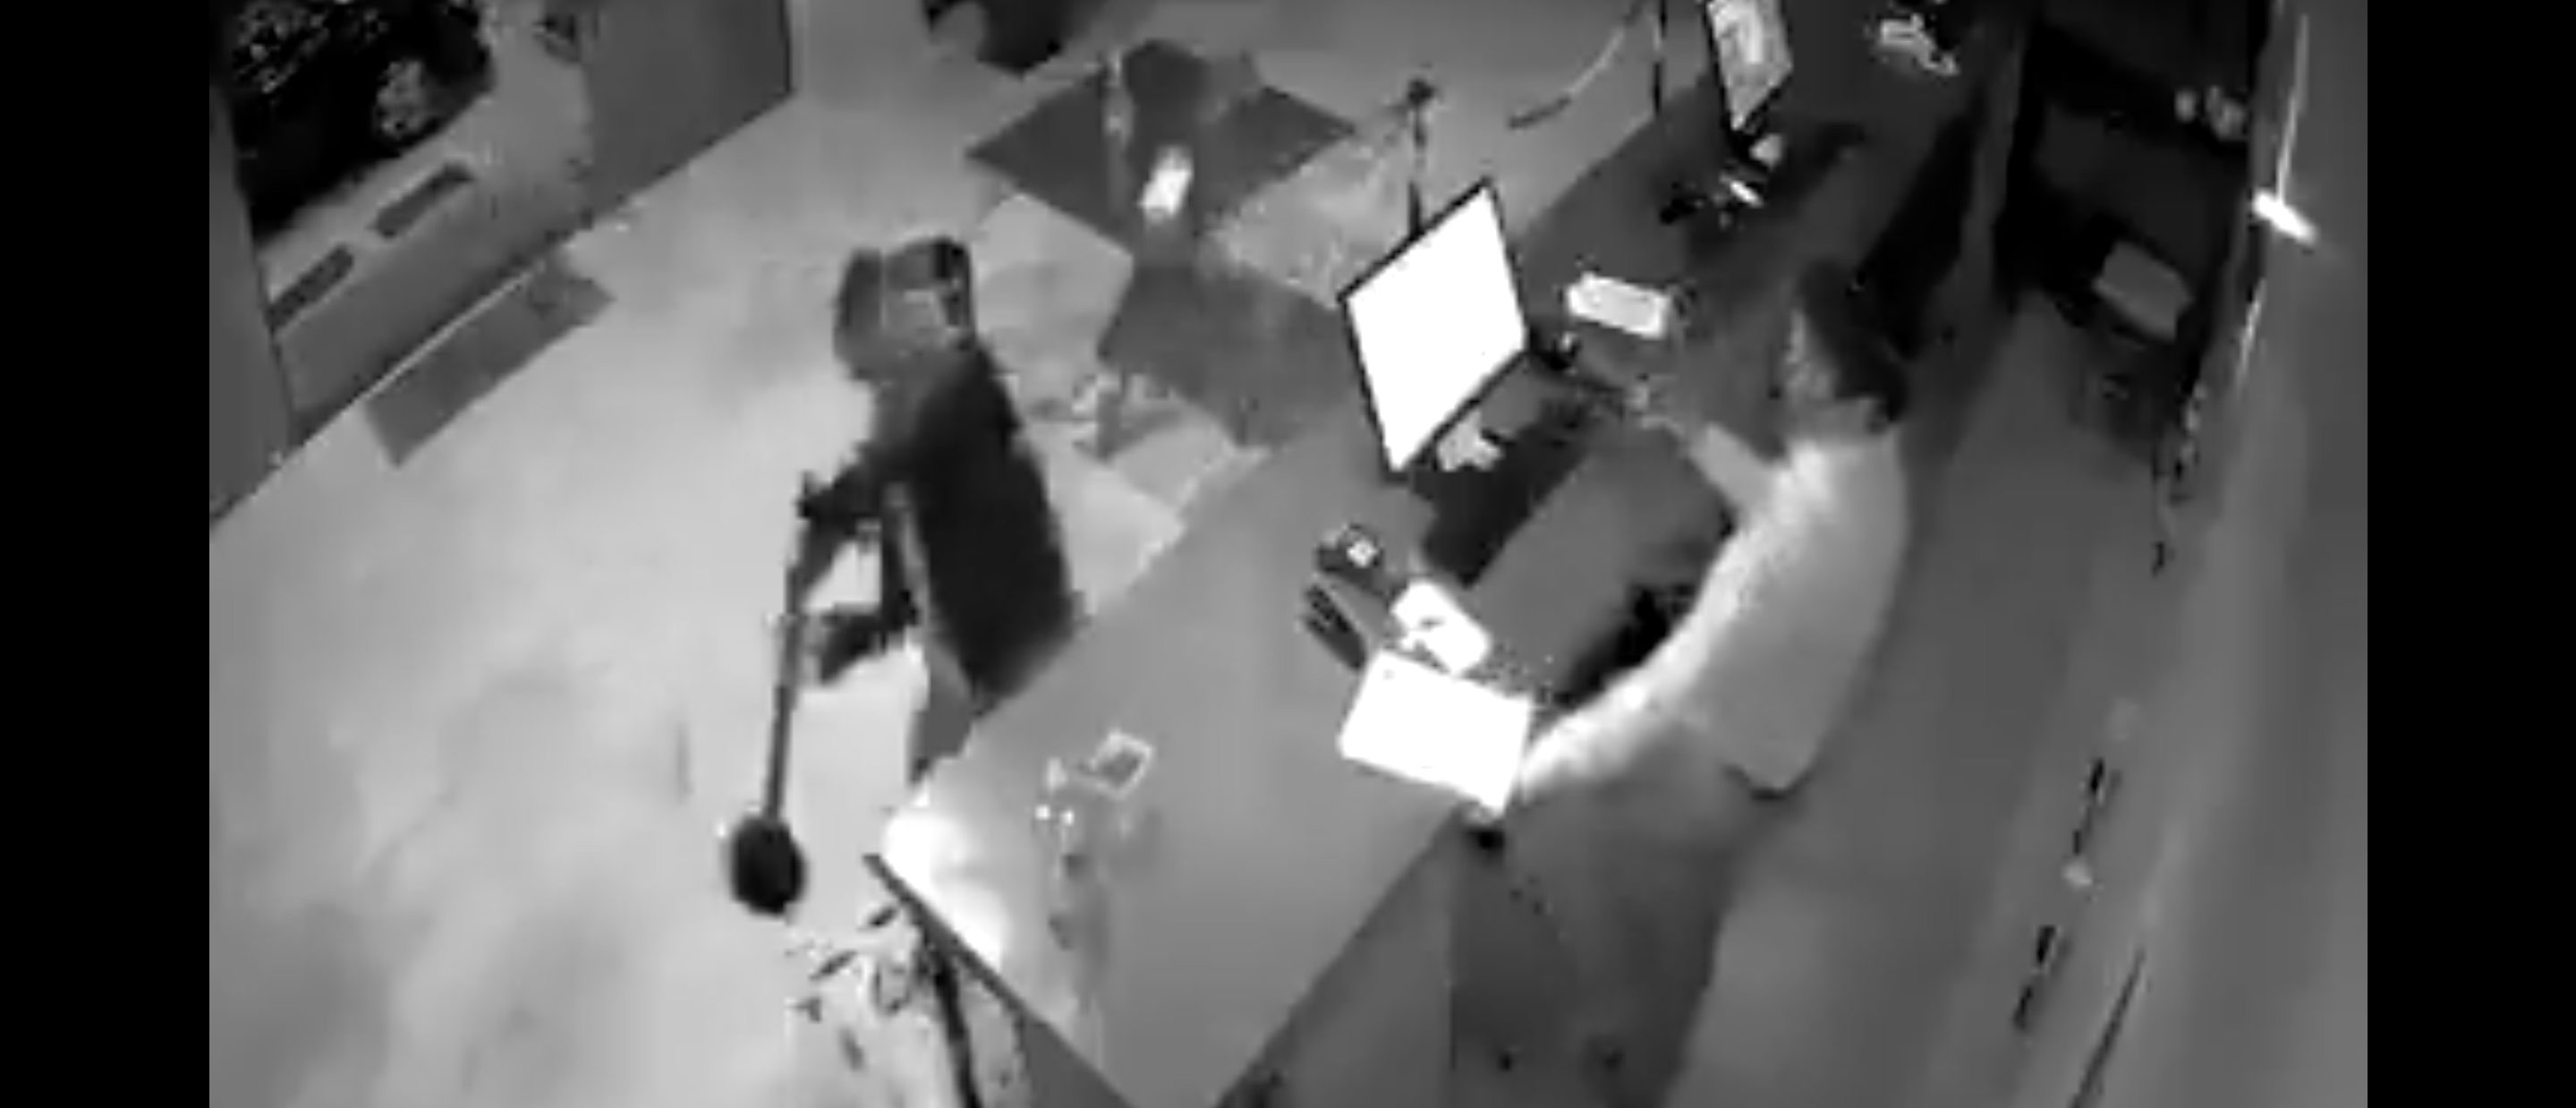 Man Attacks Hotel Clerk For Asking To Check His Temperature, Gets Beaten Badly By Employee